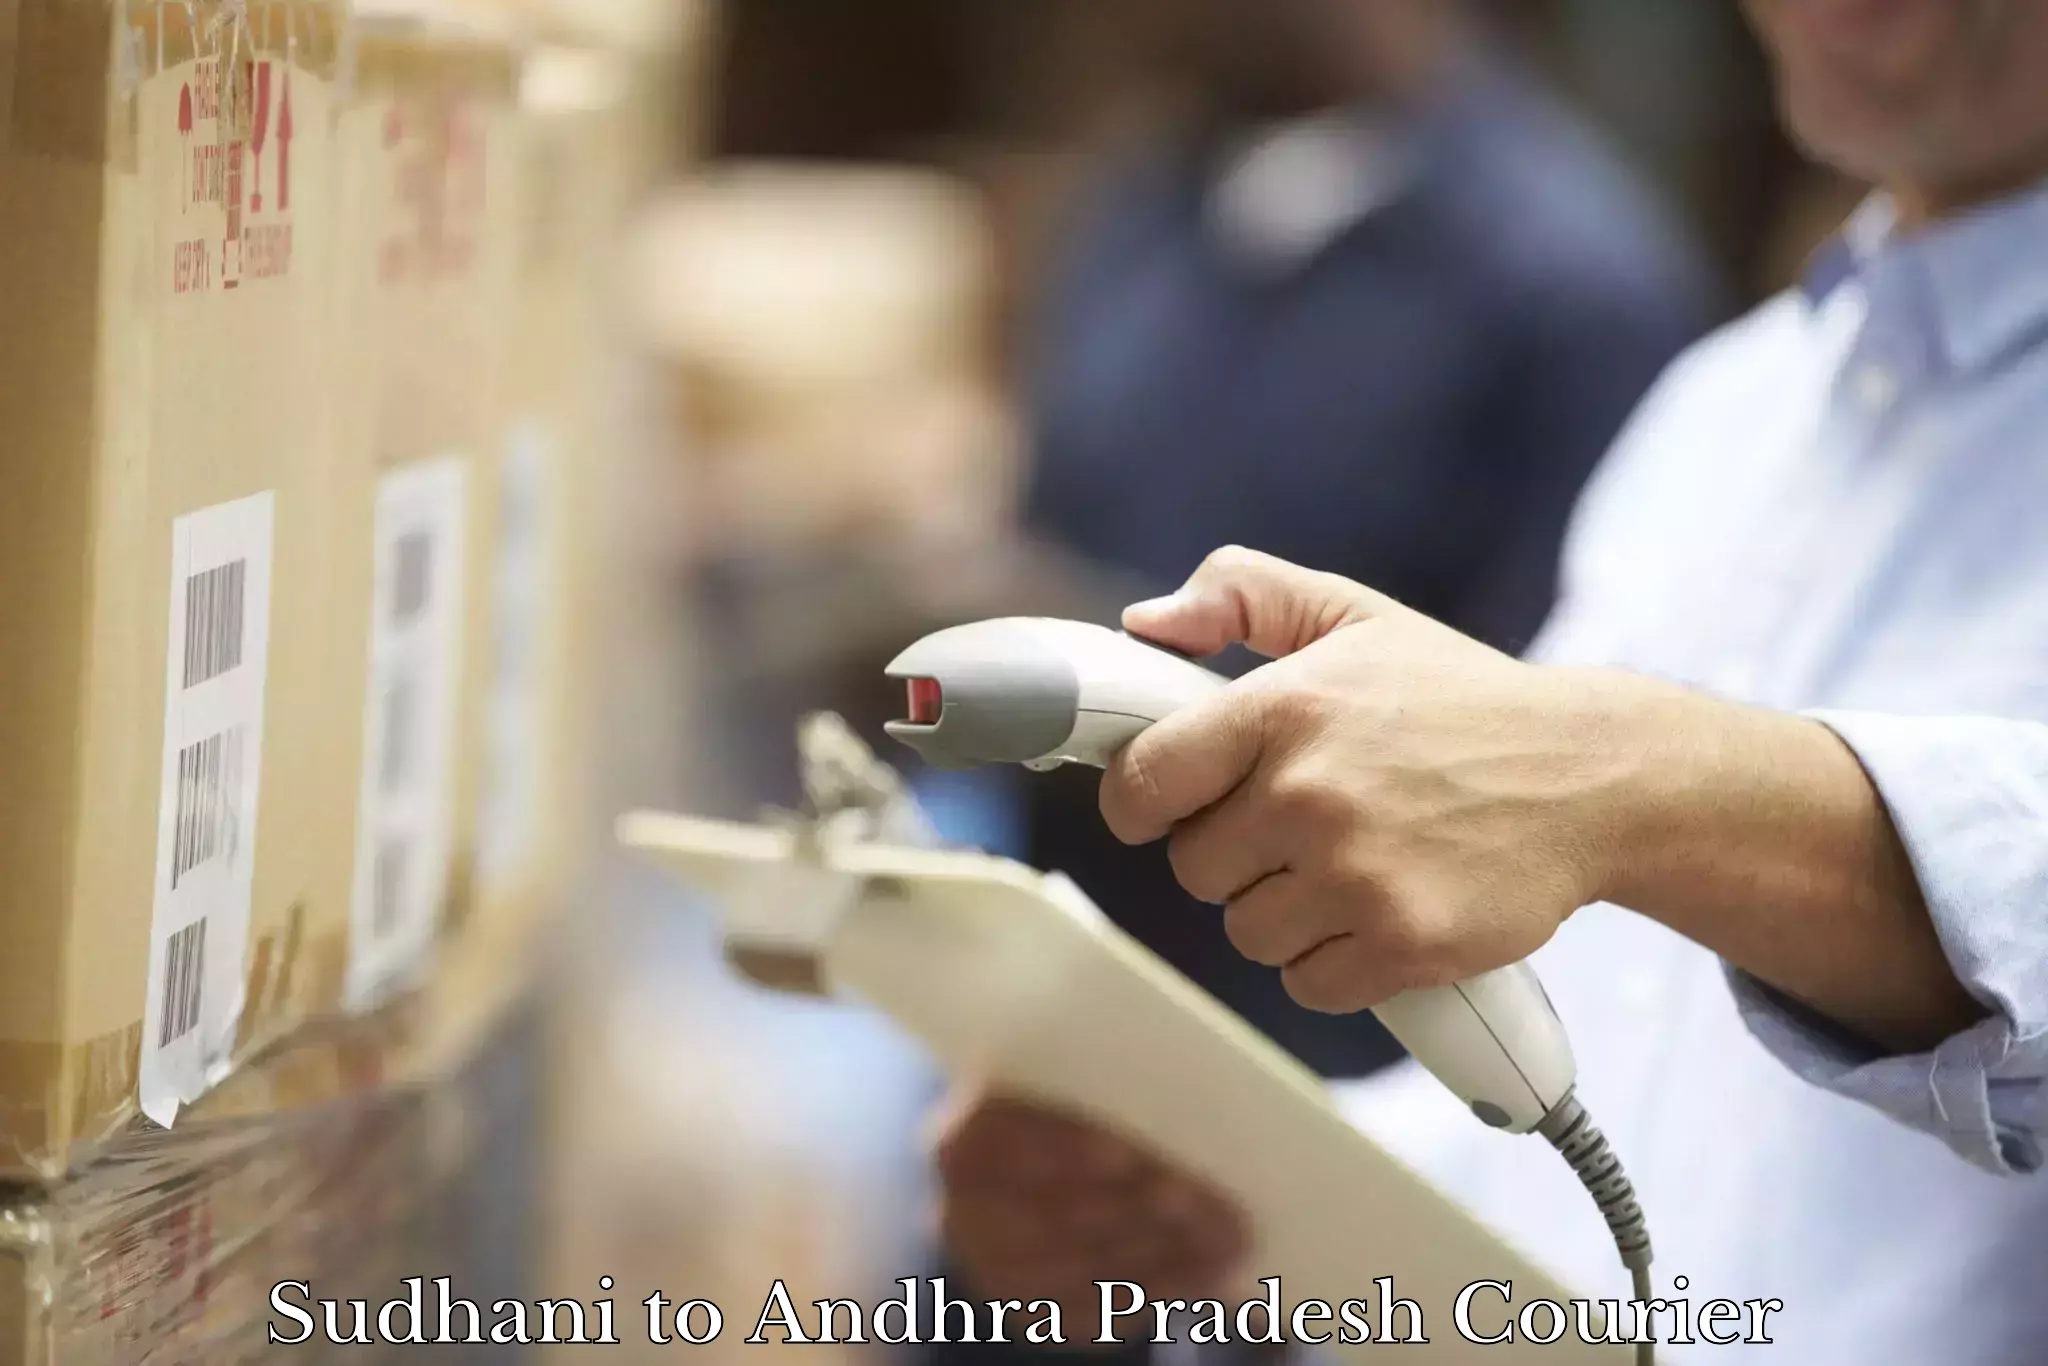 Easy access courier services in Sudhani to Annavaram